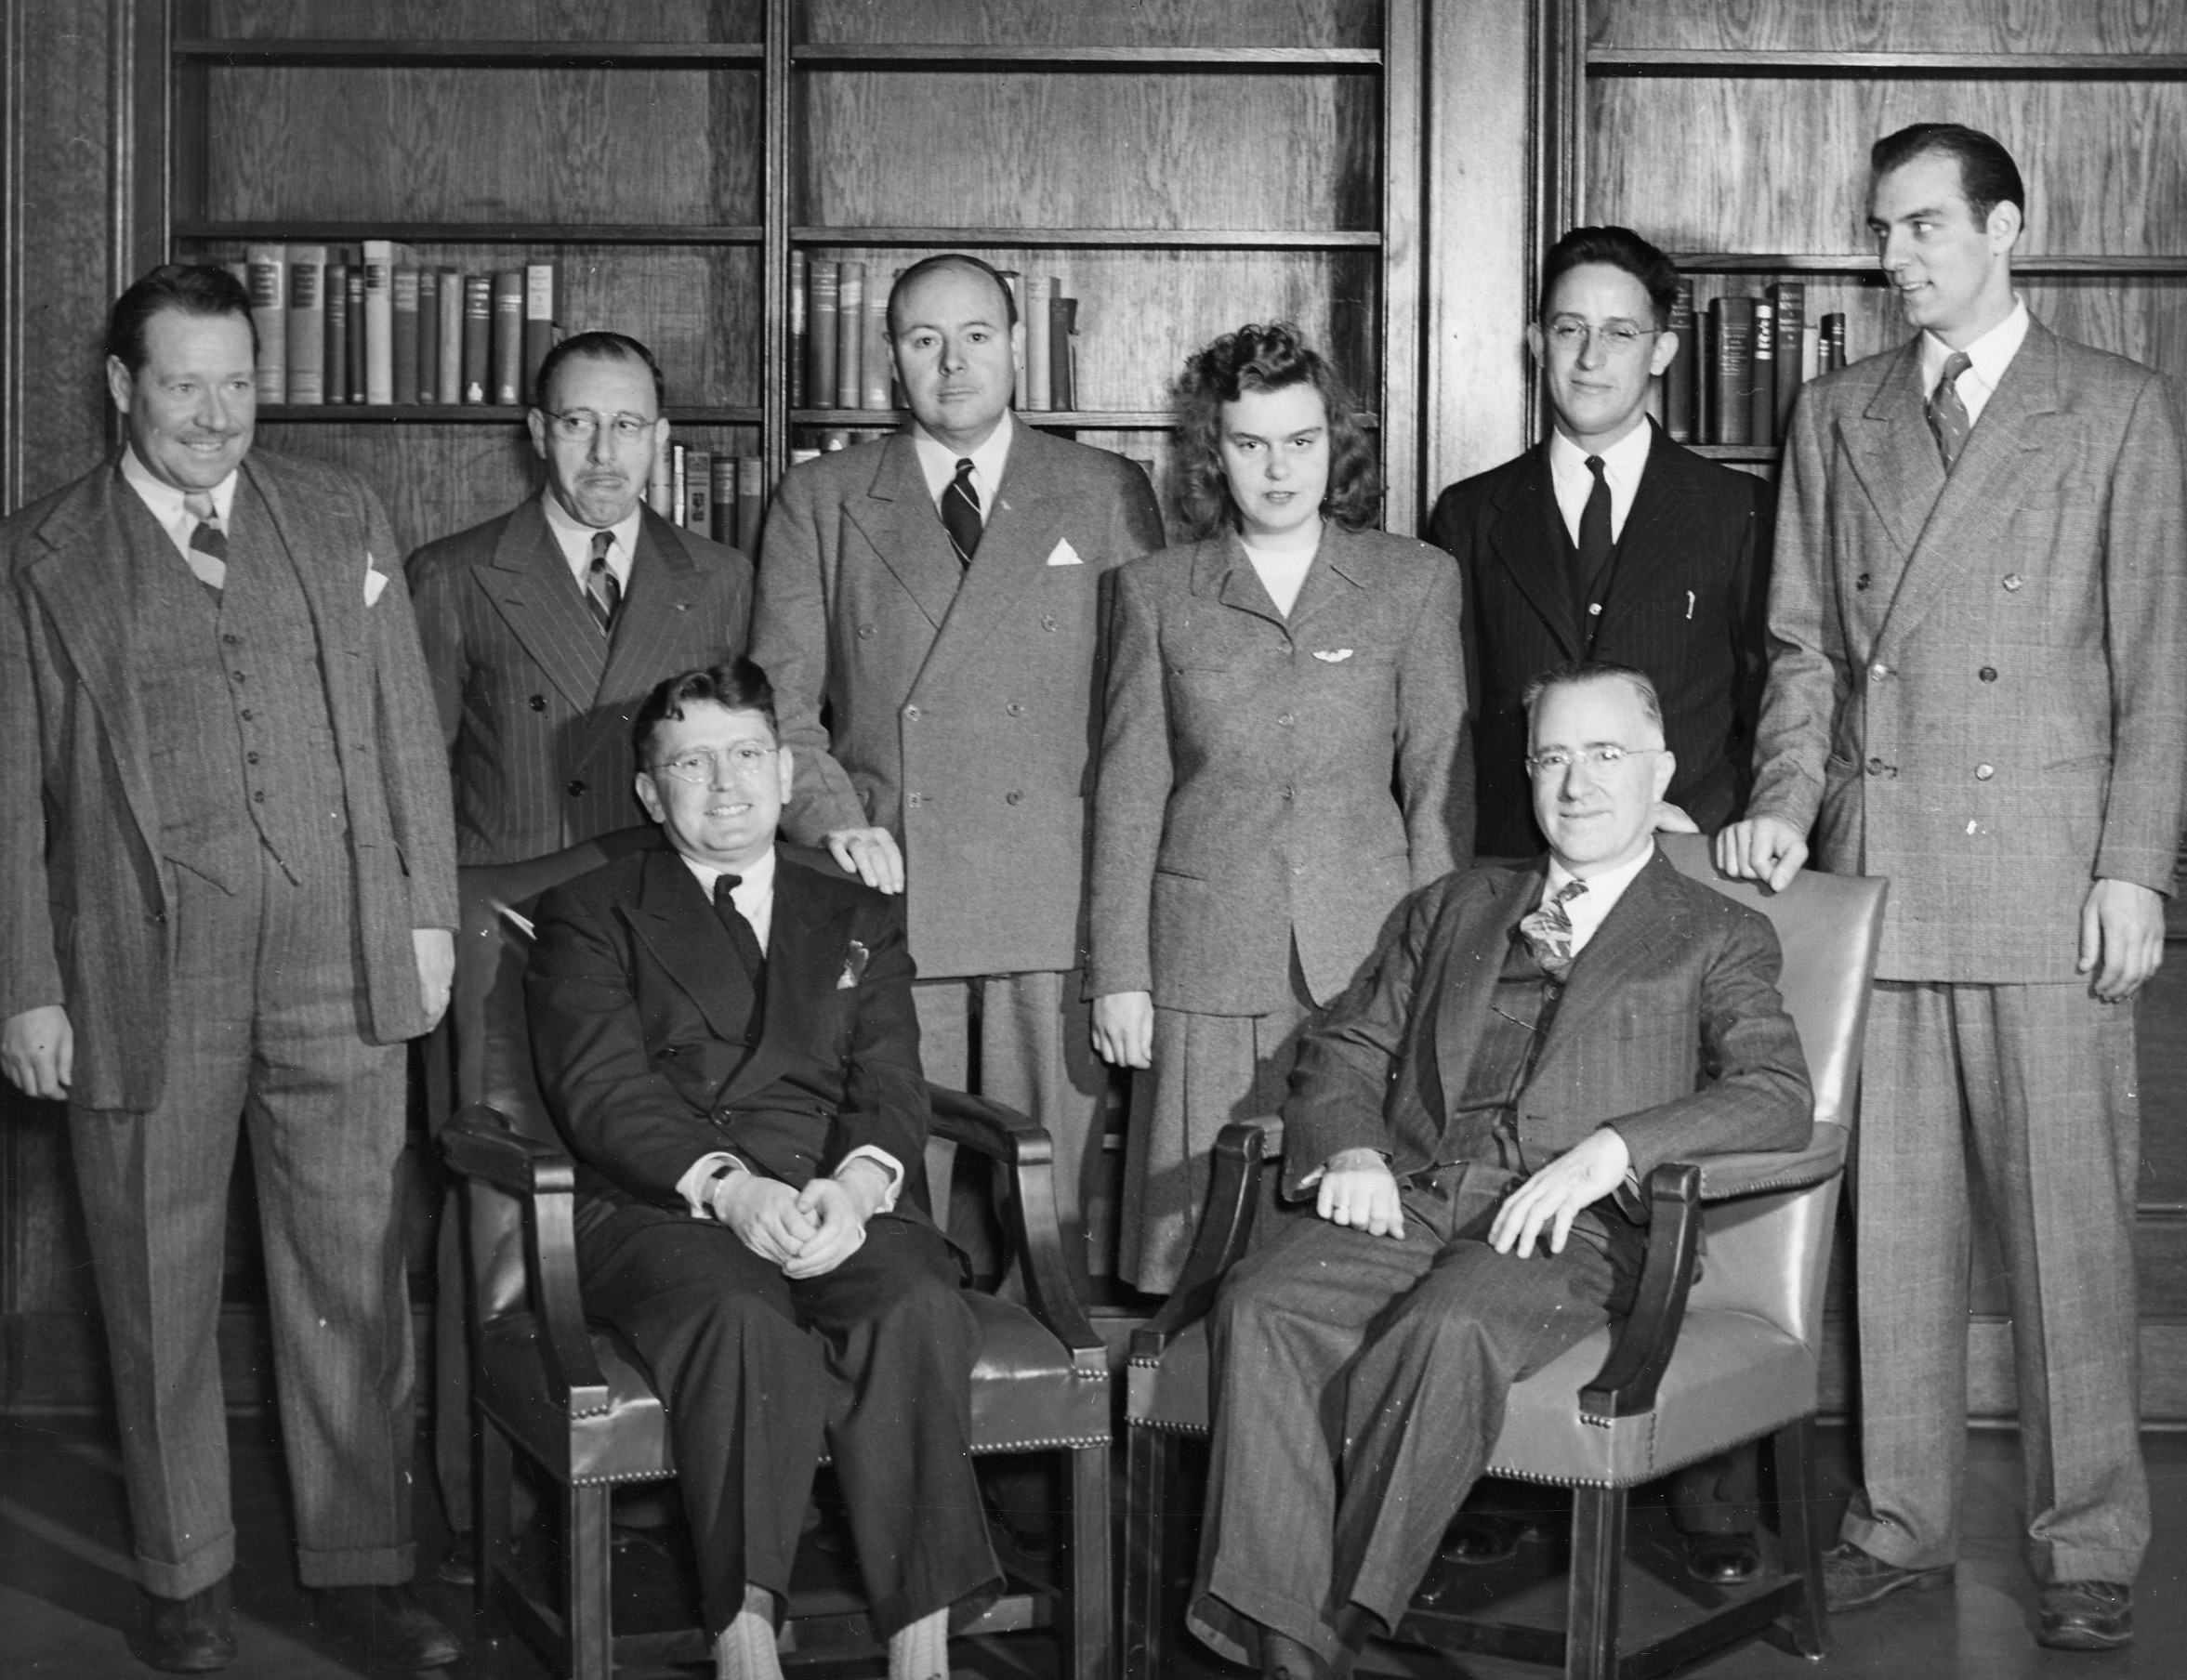 Laurence J. Ackerman (seated left) served as the first School of Business dean from 1941–1963.